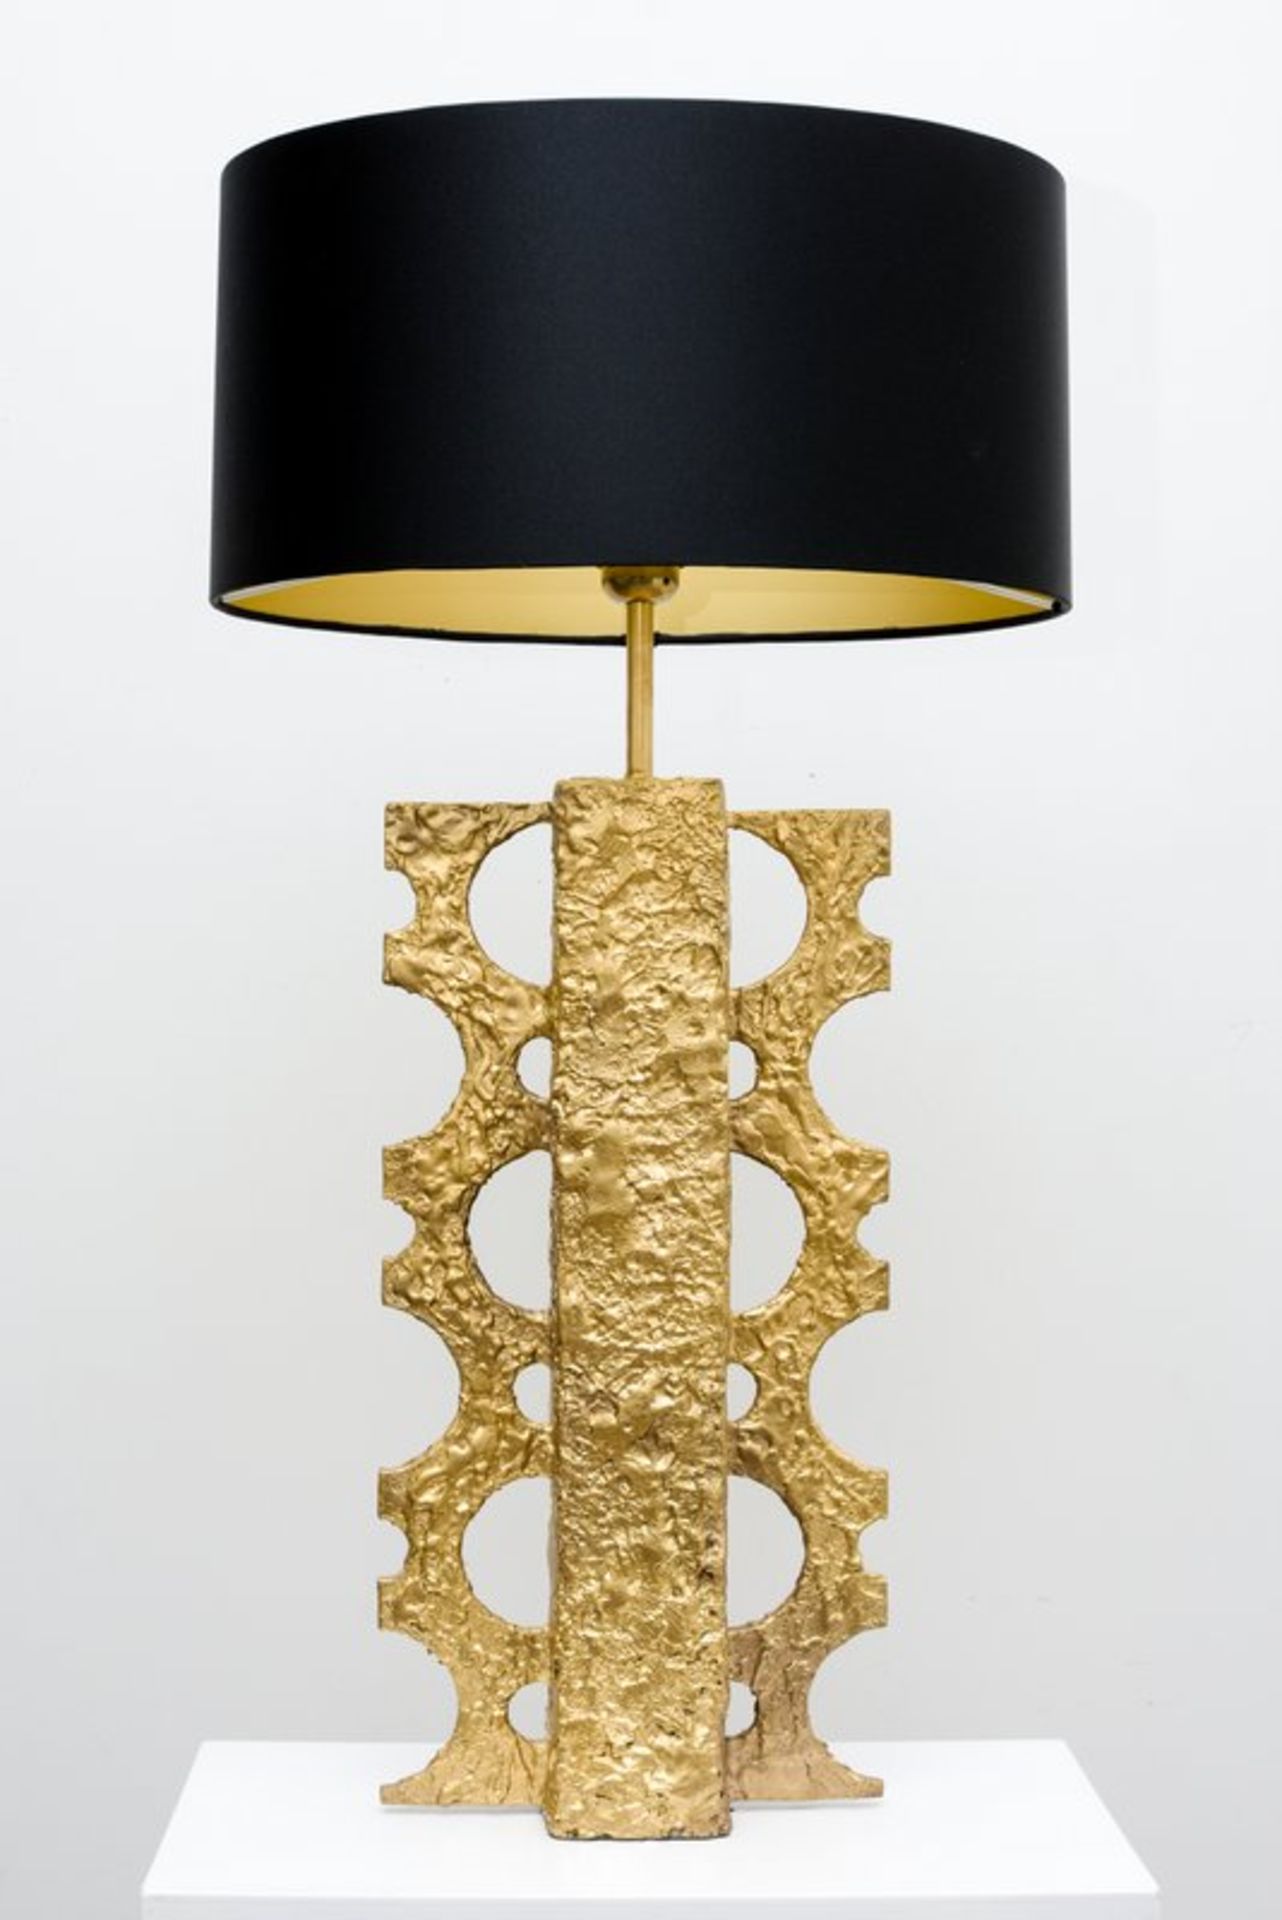 Artist: Rinat - ‘Majestic” - single table lamp, hand crafted